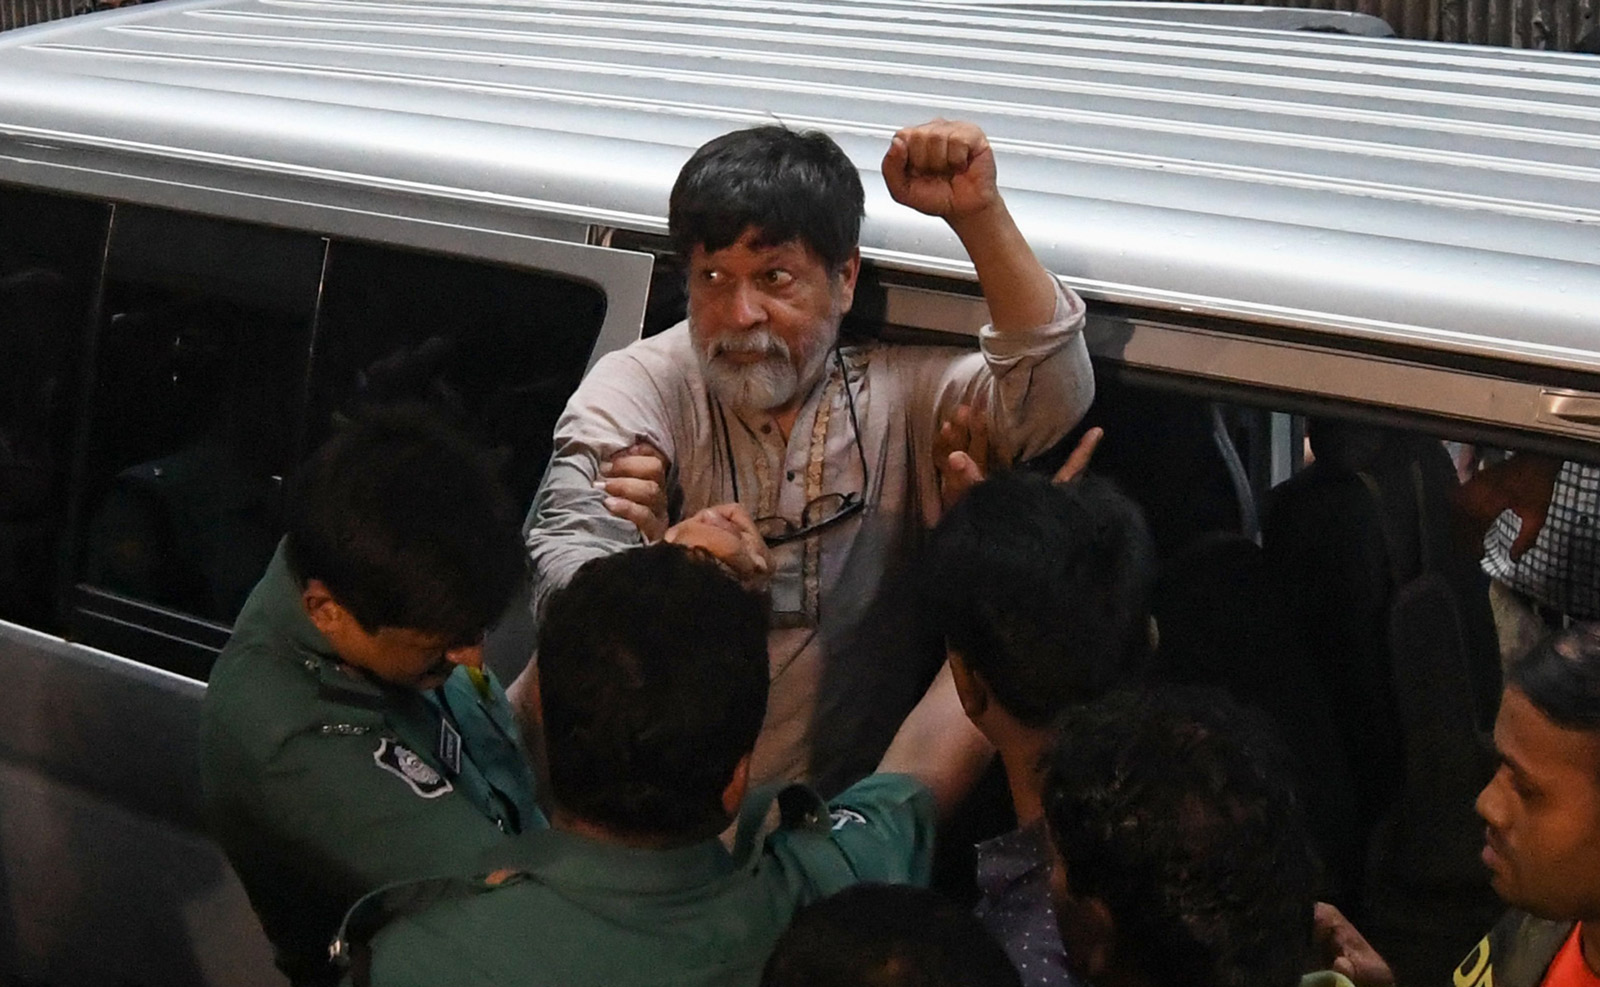 Photojournalist Shahidul Alam arriving for a court appearance following his arrest after a student protest, Dhaka, August 6, 2018